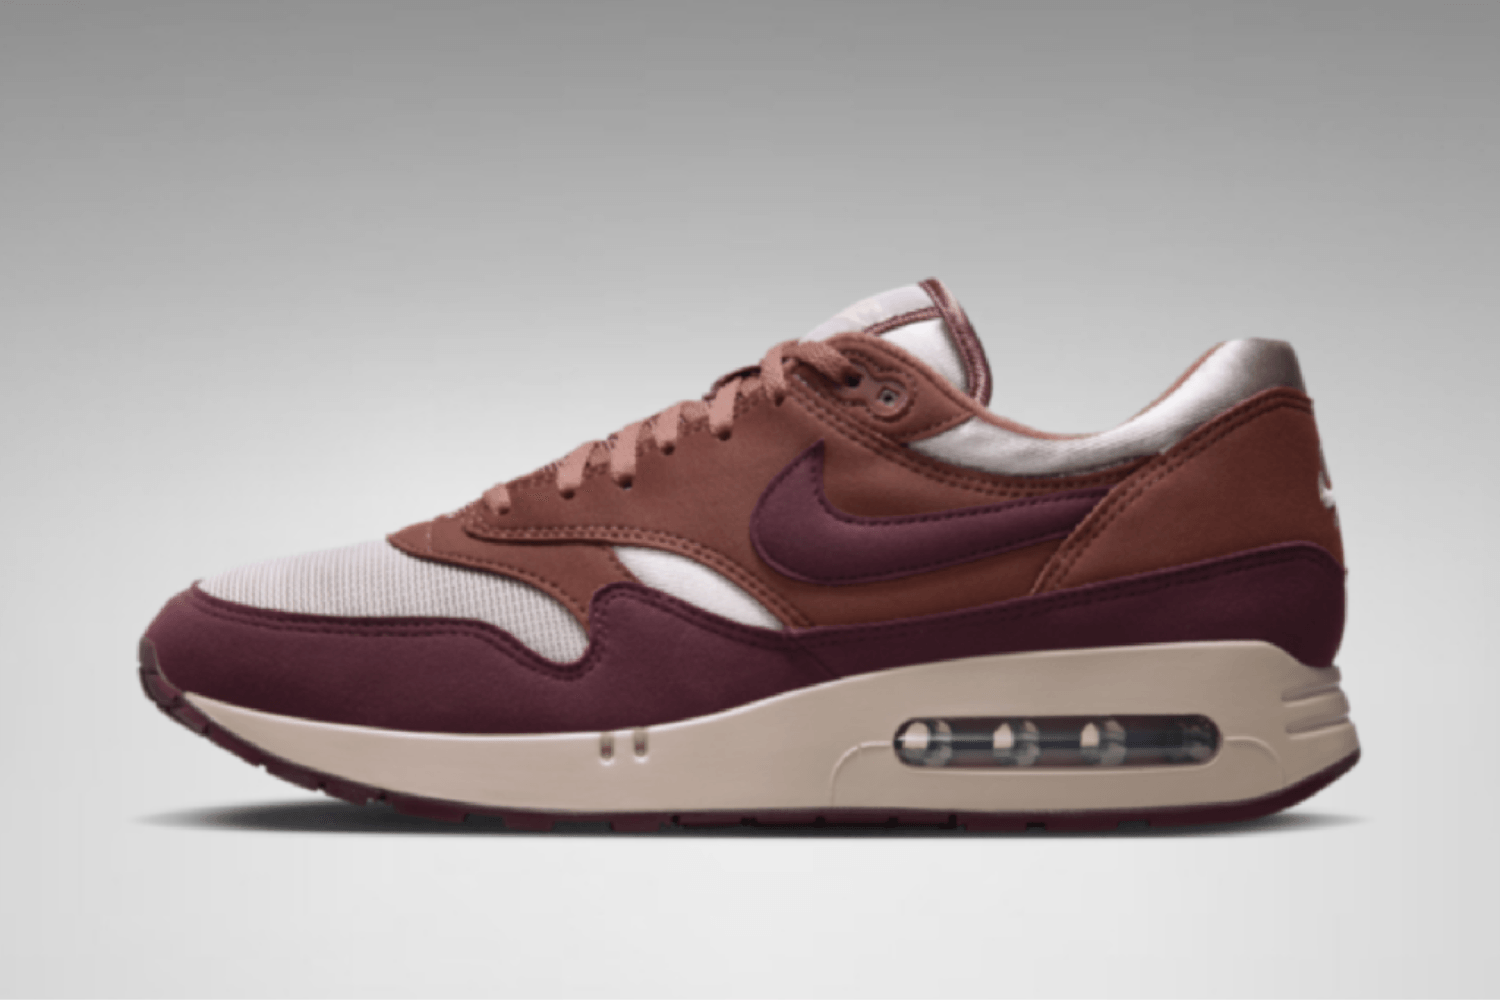 The Nike Air Max 1 'Big Bubble' will drop in 'Smokey Mauve' colorway